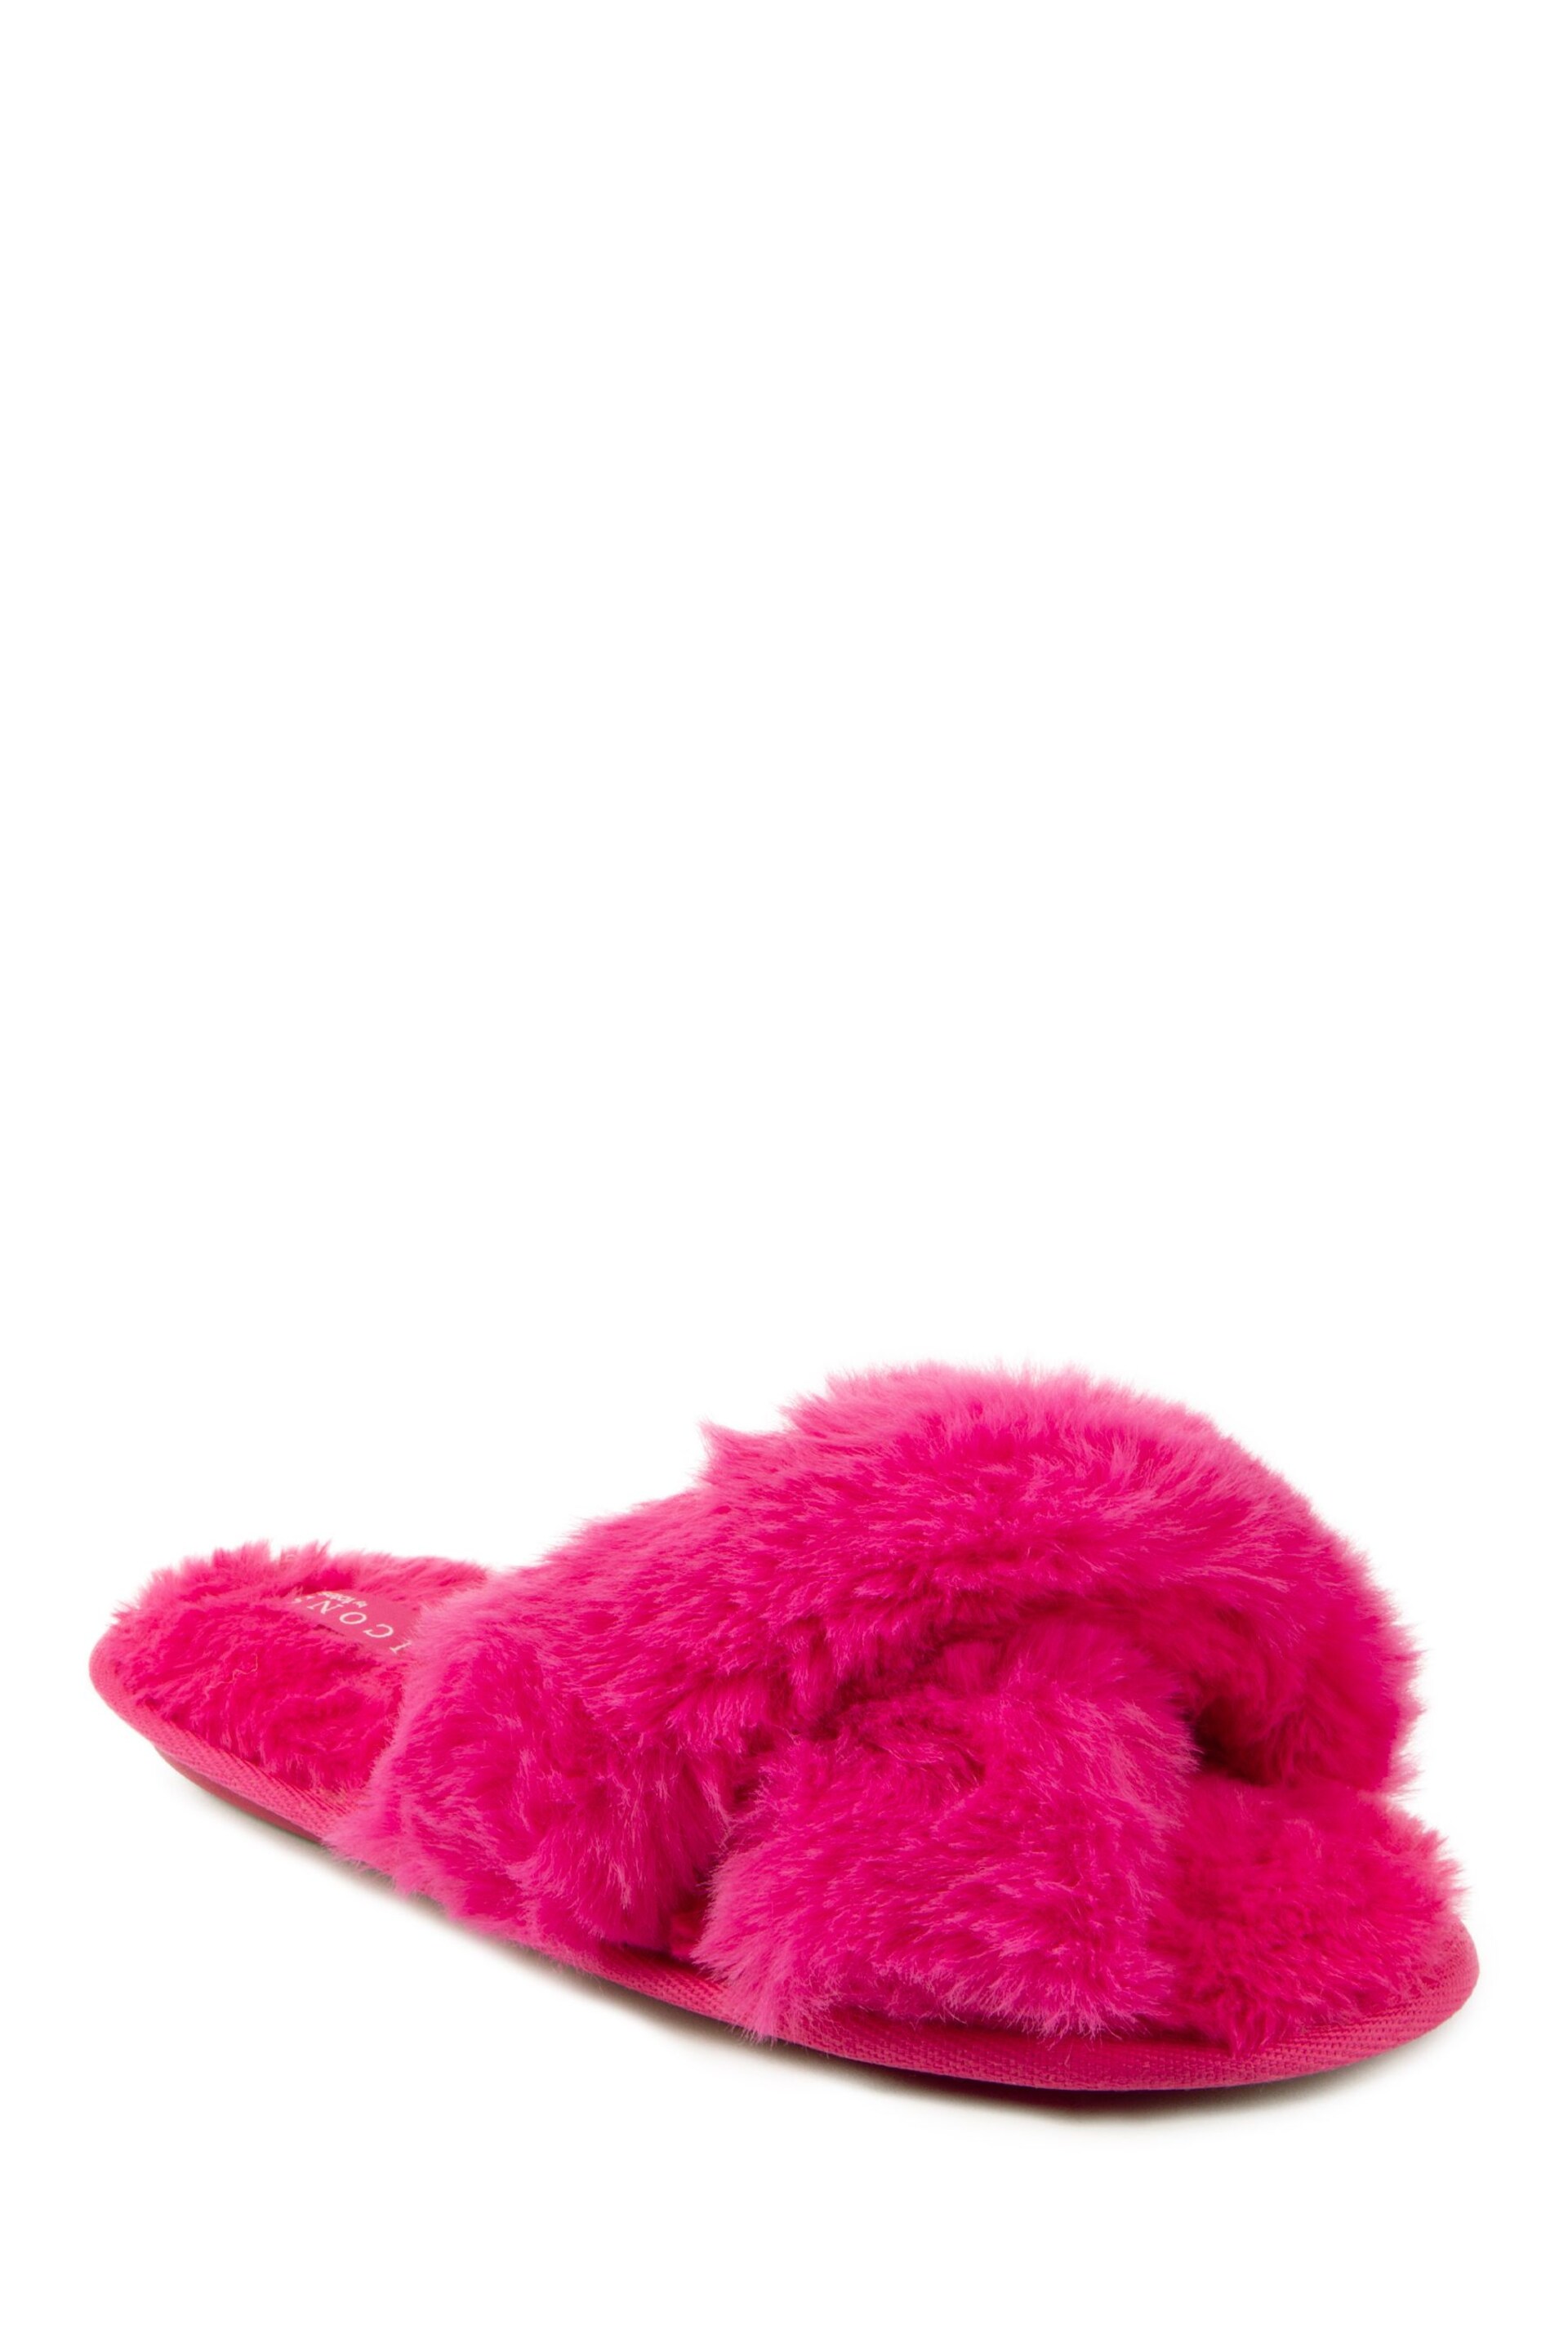 Totes Pink Plush Faux Fur Cross Over Slider Slippers - Image 3 of 5